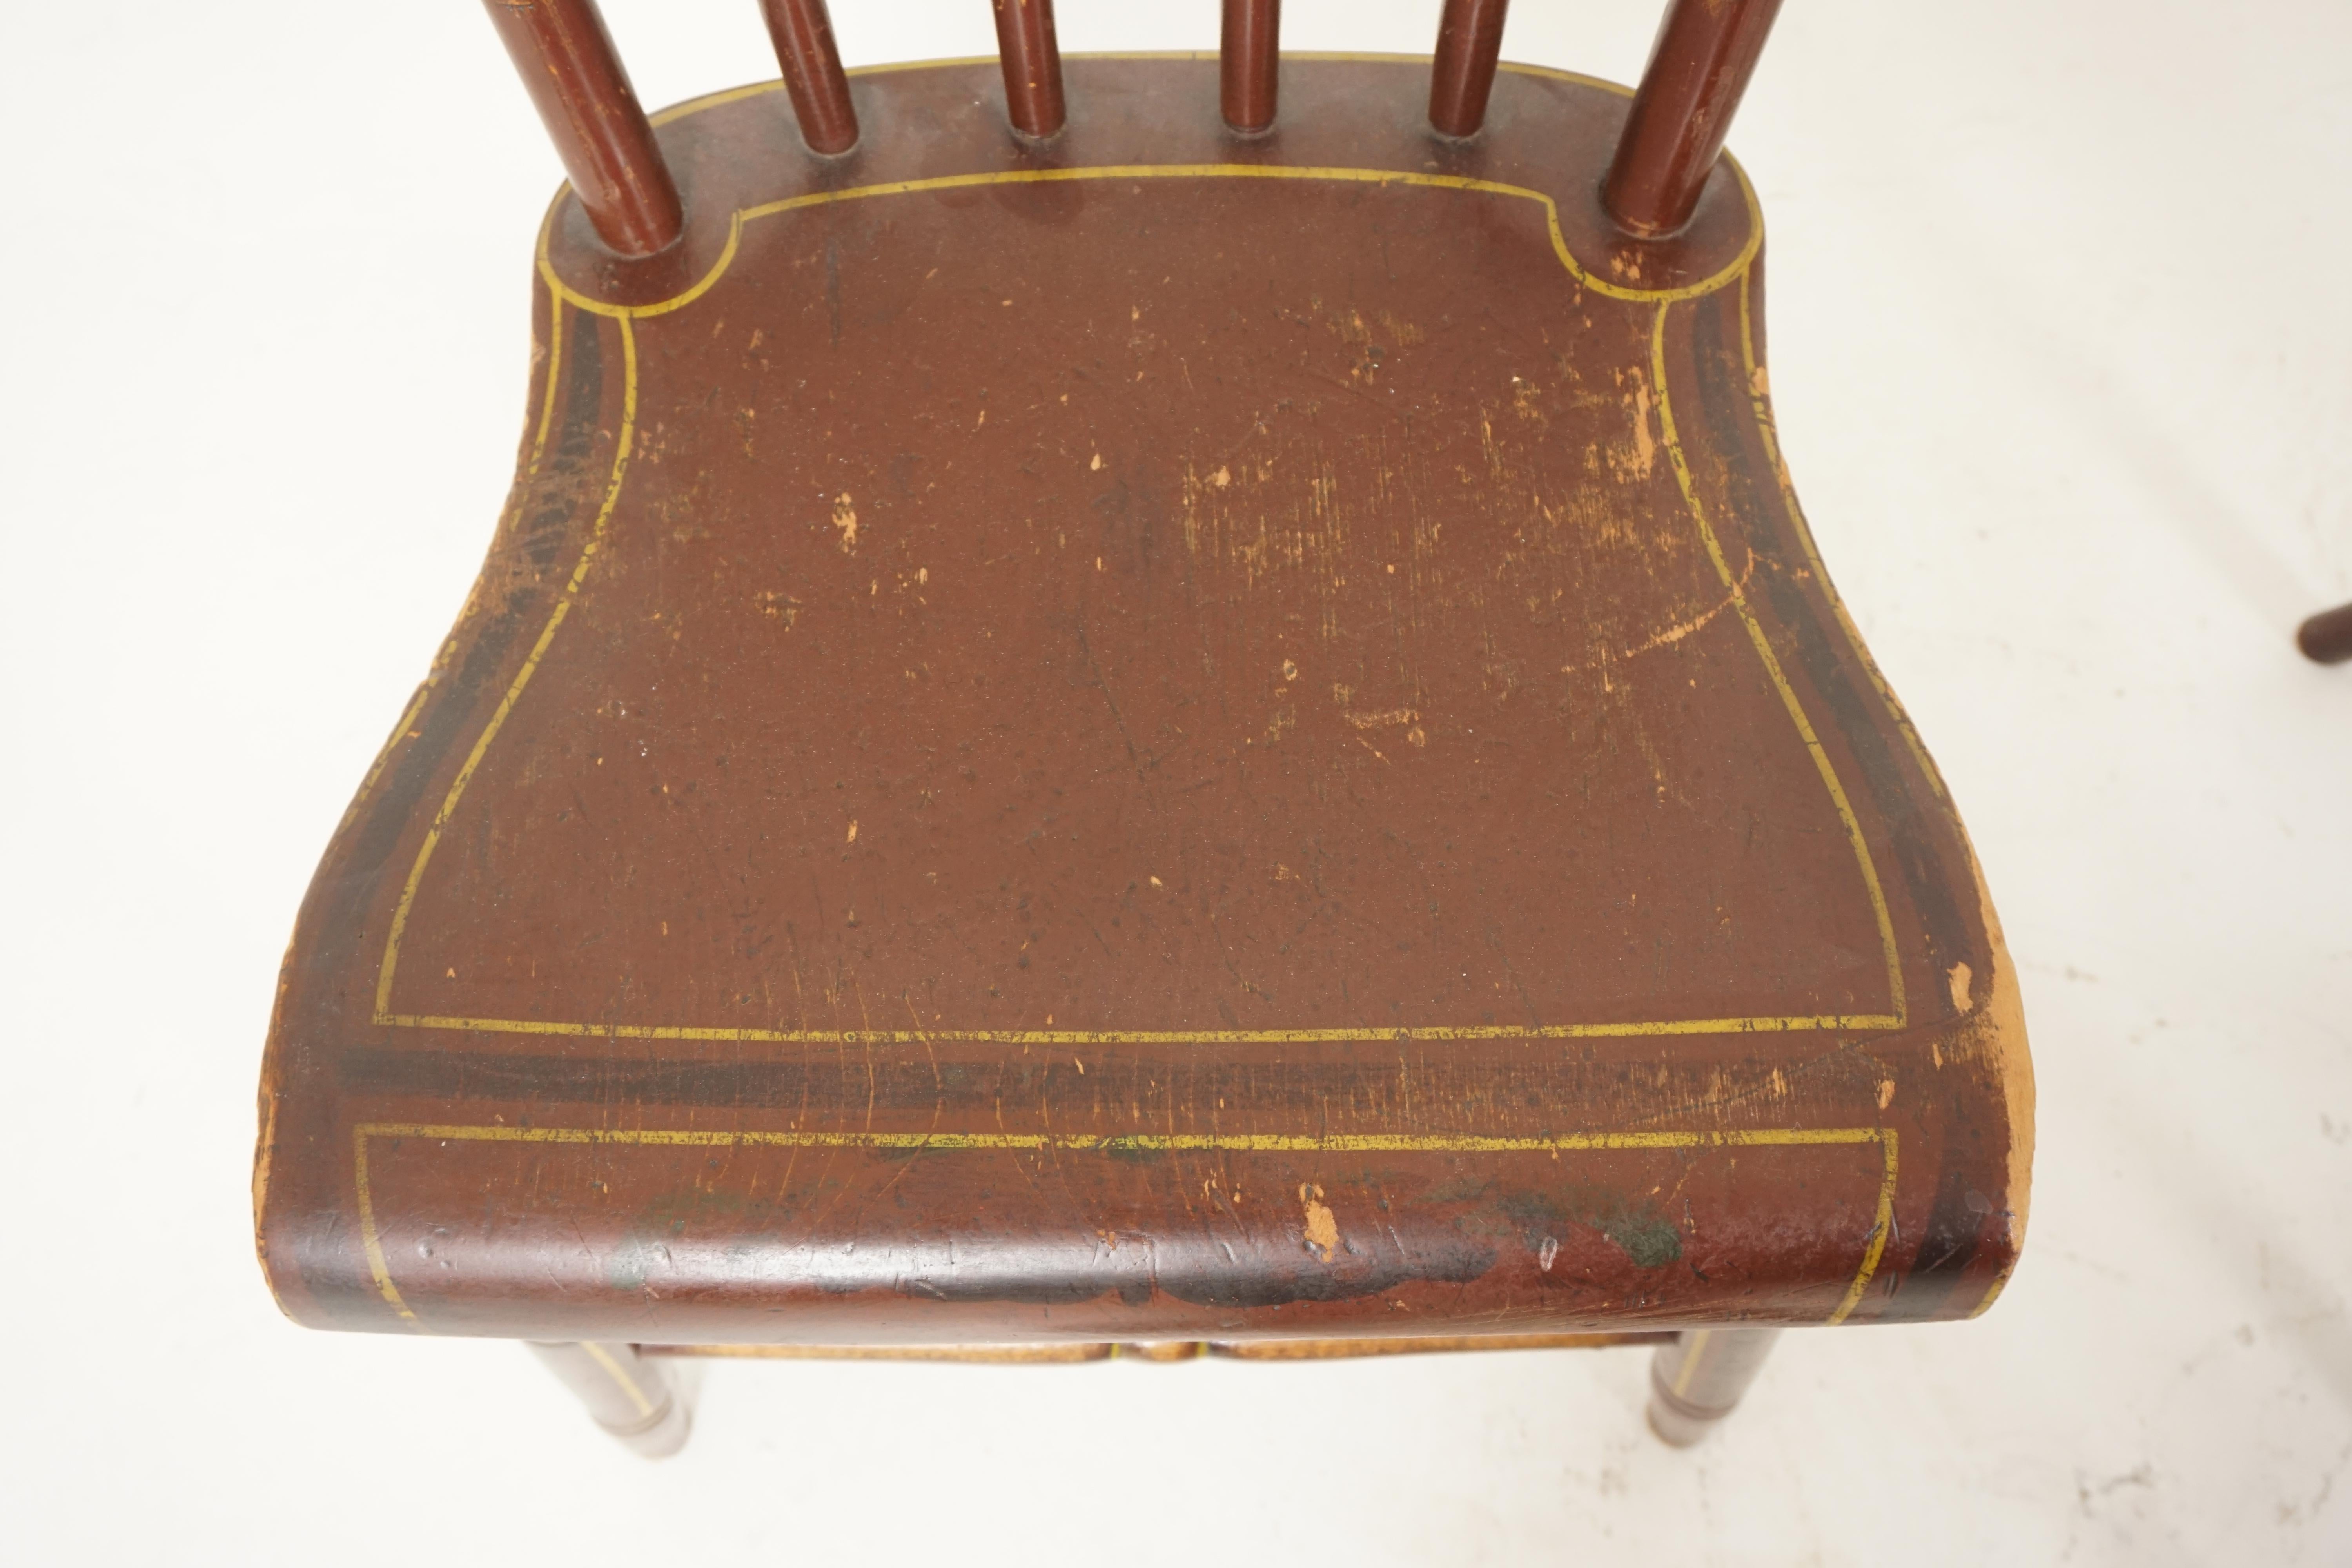 Antique hardwood chairs, set of 6, Pennsylvania dutch painted plank bottom chairs, America 1890, B2080

America 1890
Mad of hardwood (ex. Maple. Birch)
Hand painted with vestiges of paint on top rung and seats
Nice paint retention on